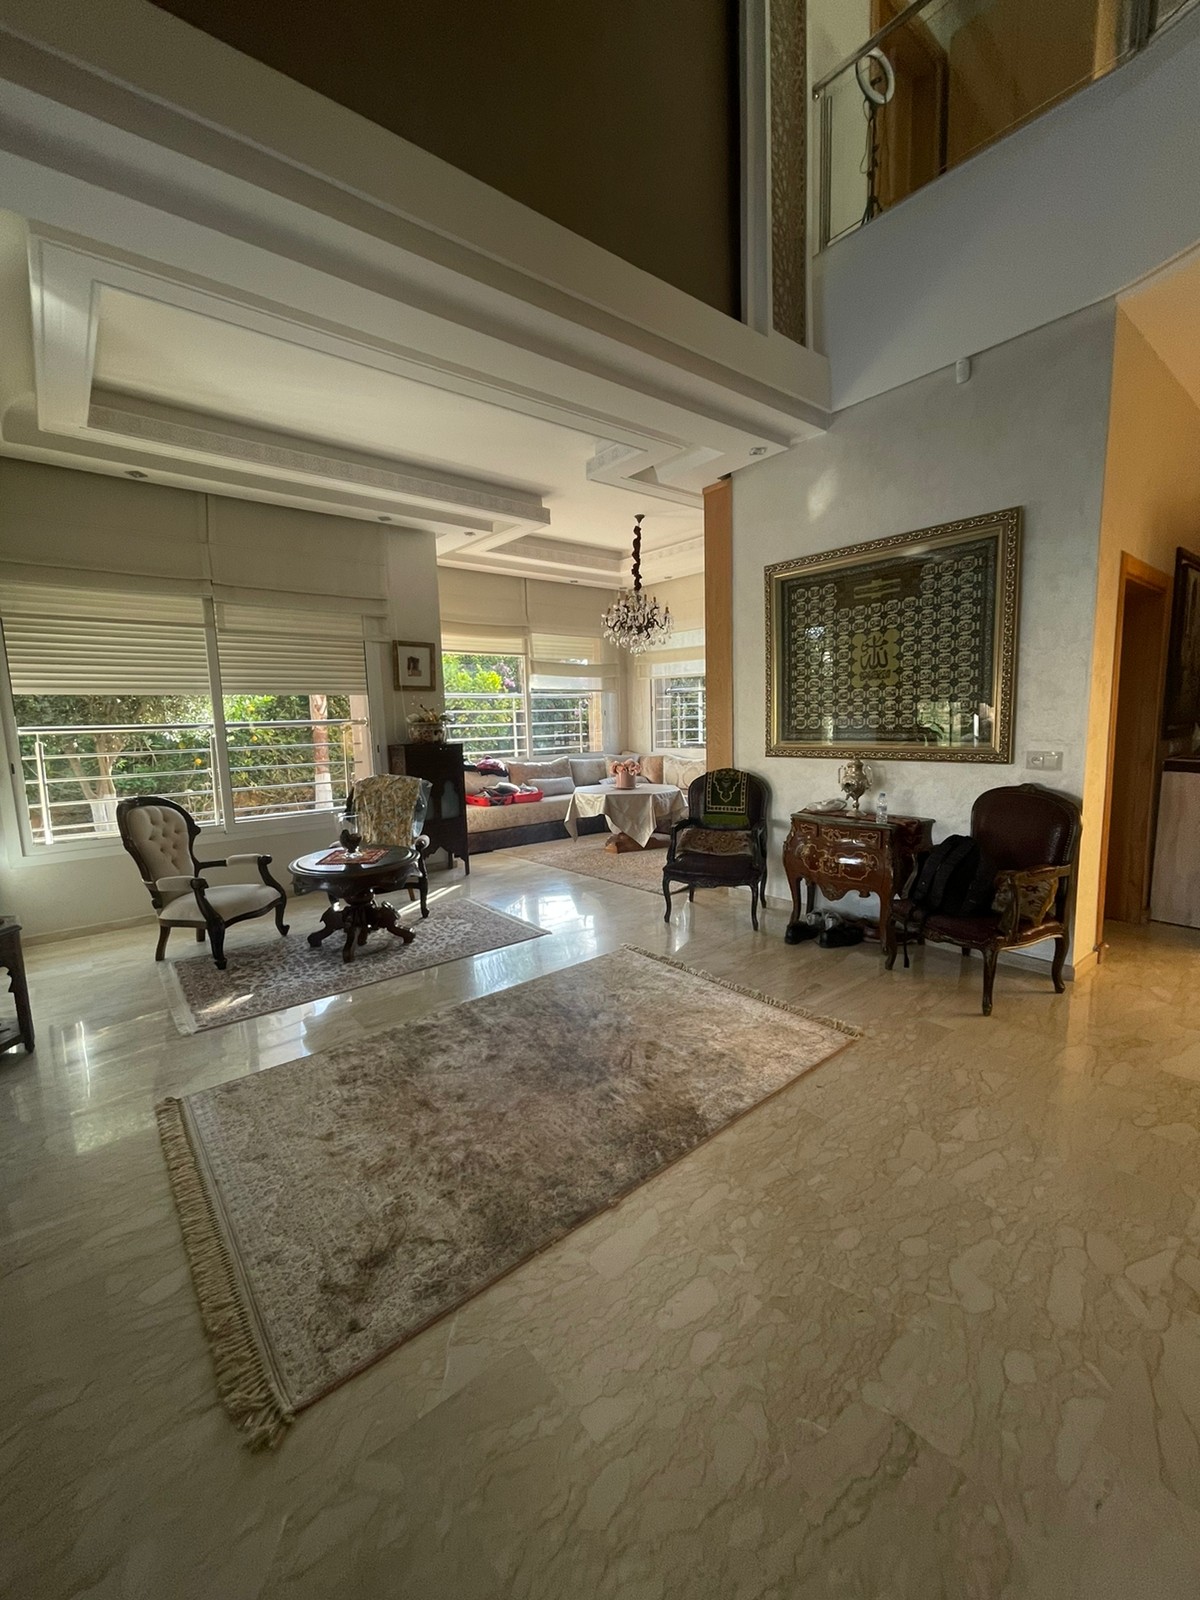 4 bedroom villa for sale on golf course